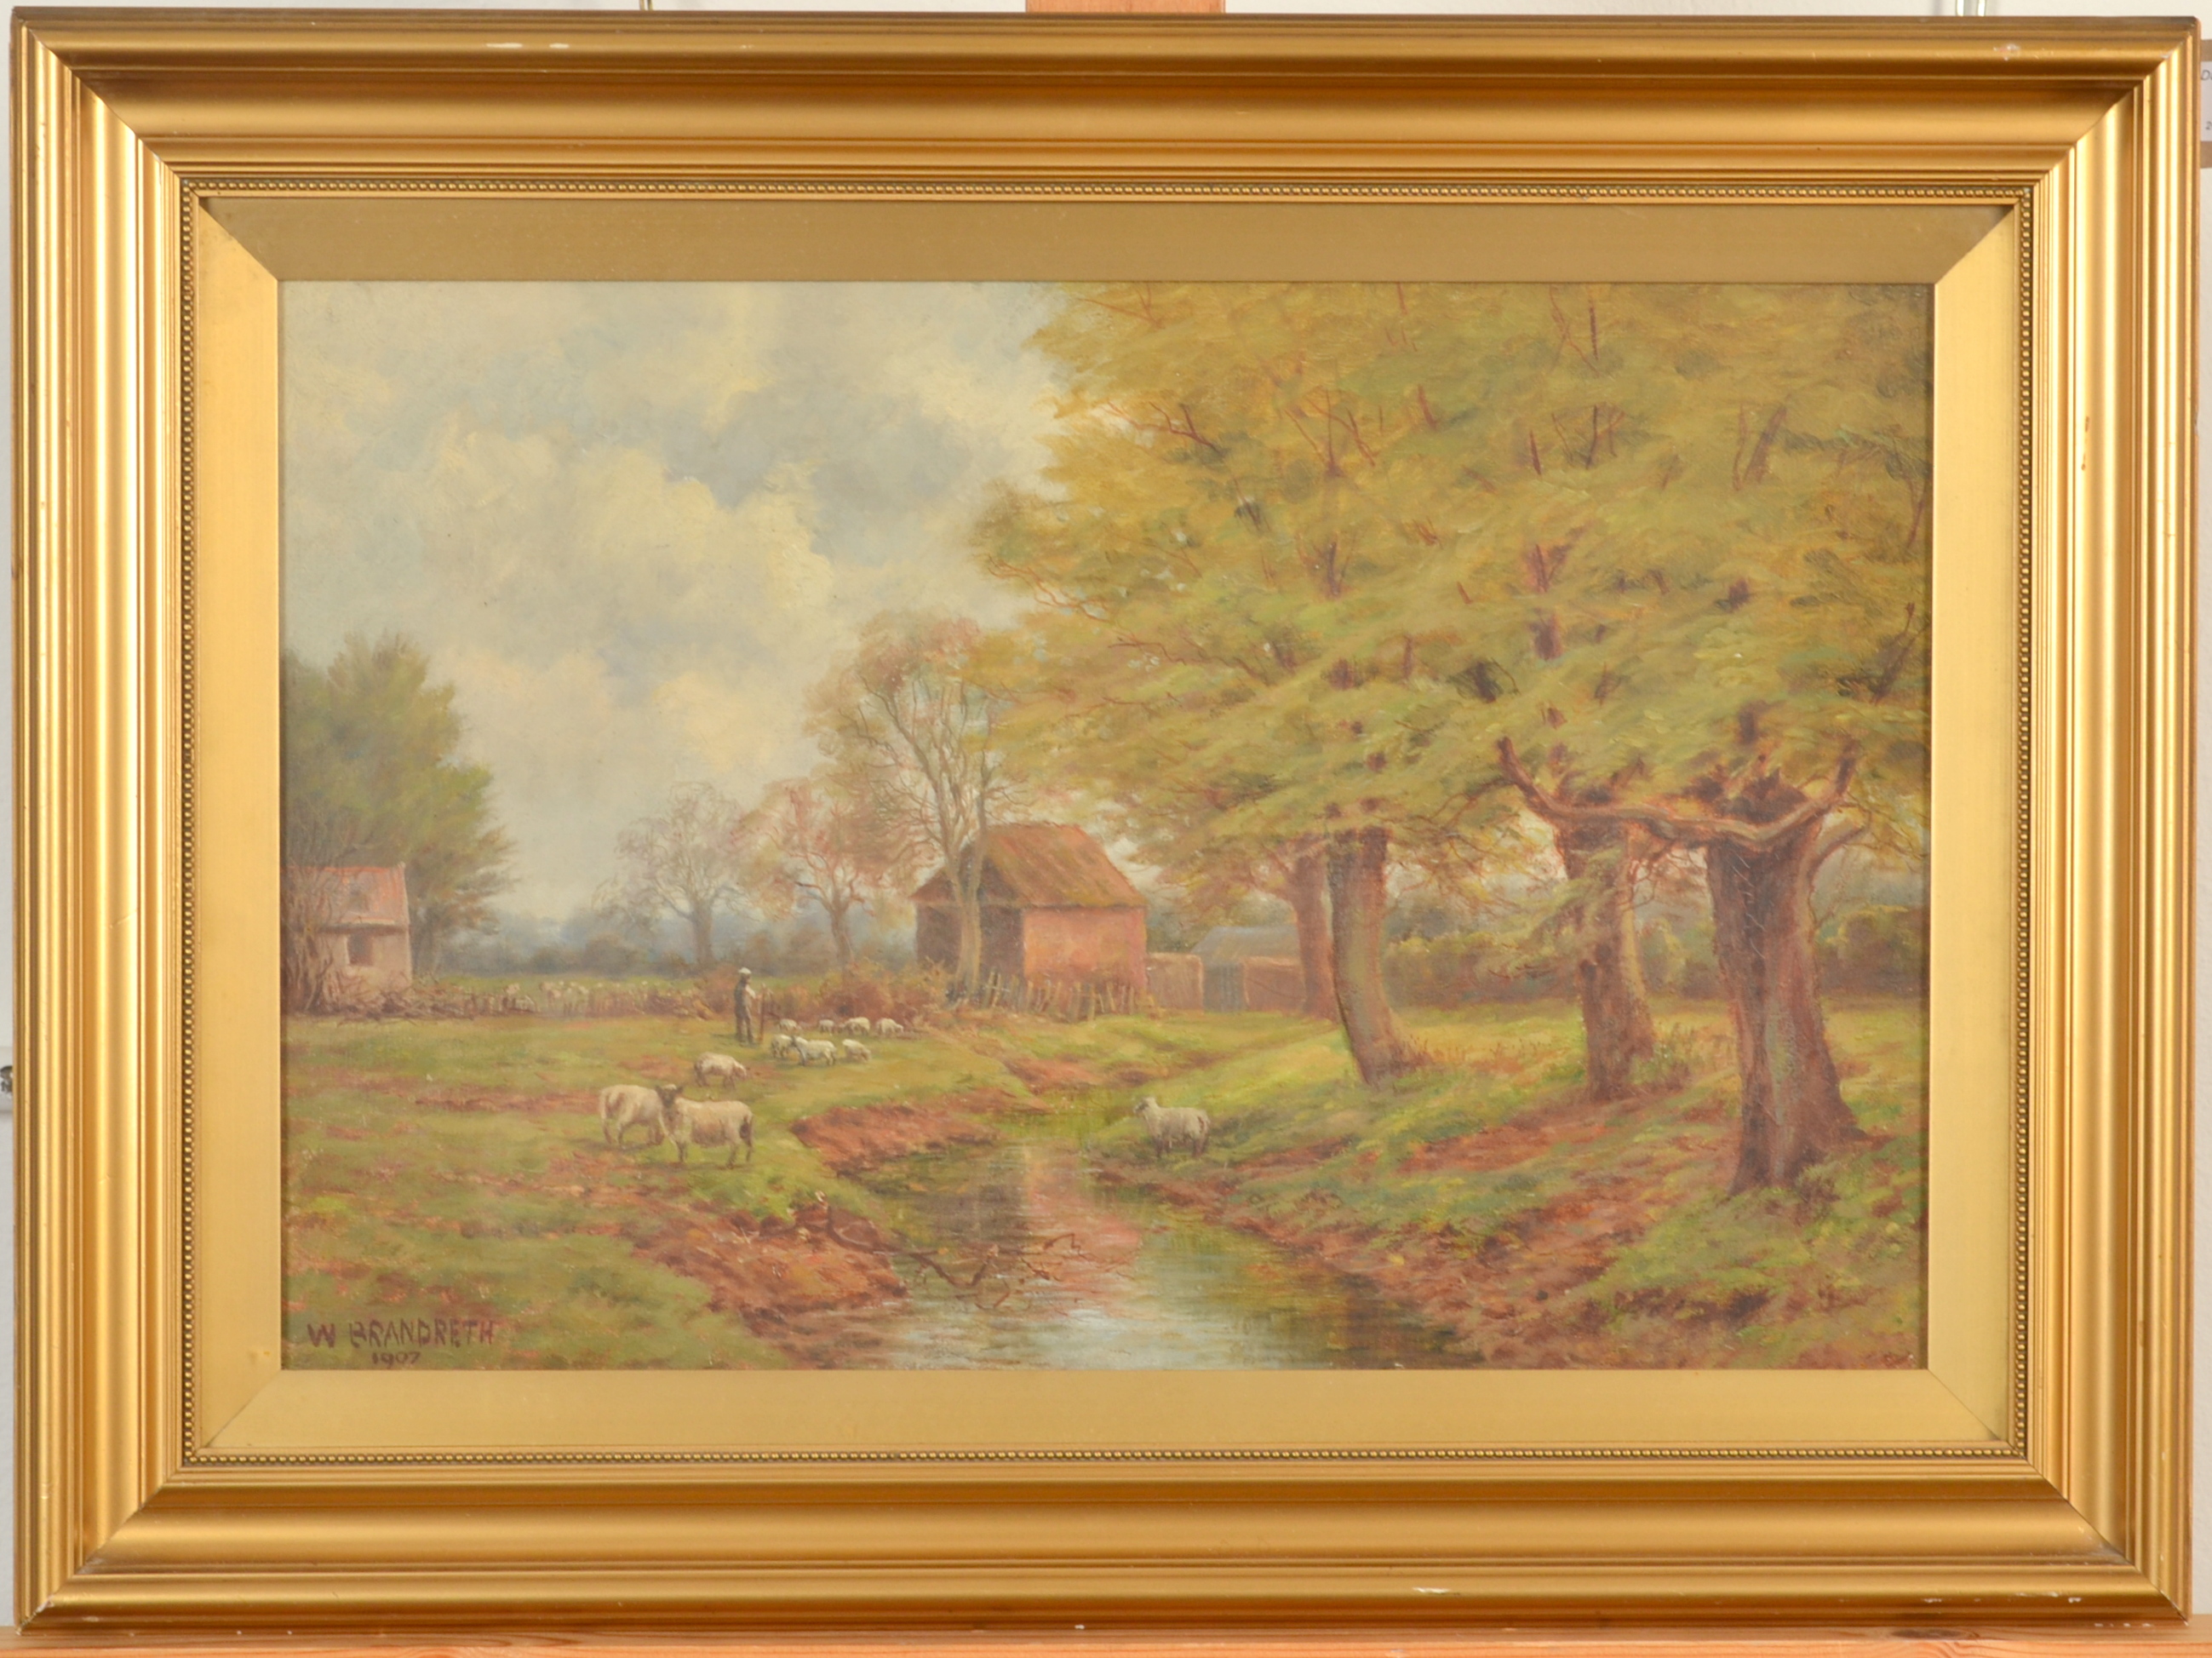 W BRANDREATH Sheep by a Brook Oil on canvas Signed and dated 1907 30 x 44. - Image 2 of 2